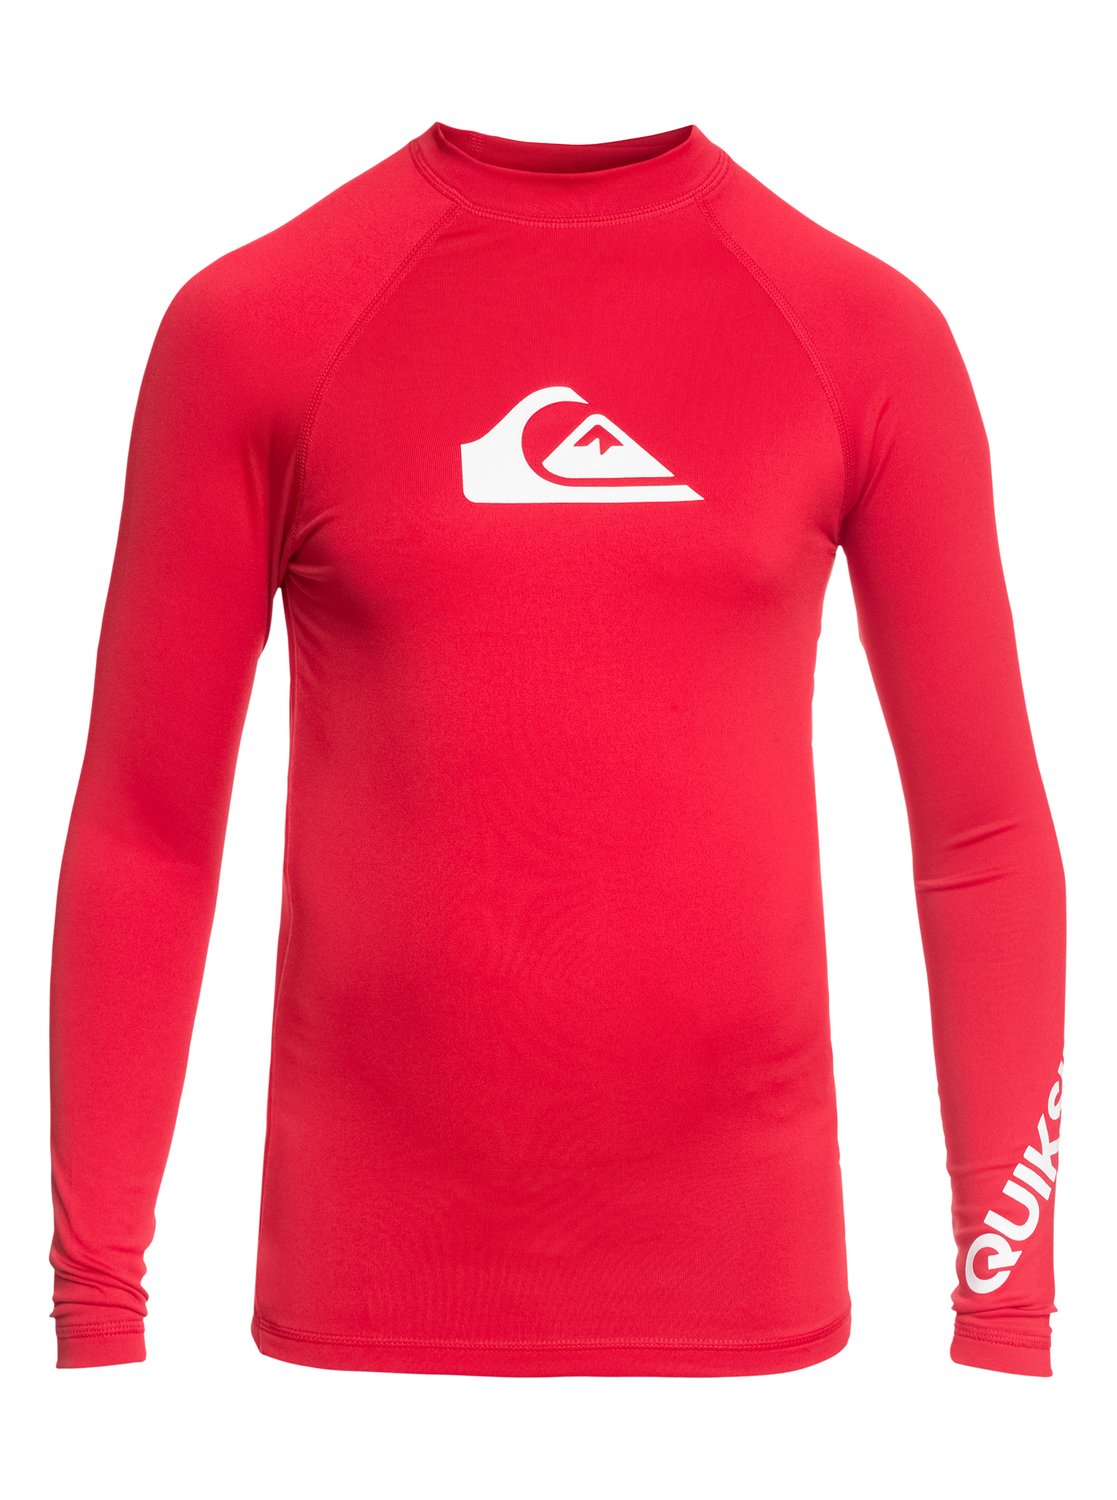 Quiksilver Boys Big Time Long Sleeve Youth UPF 50 Sun Protection